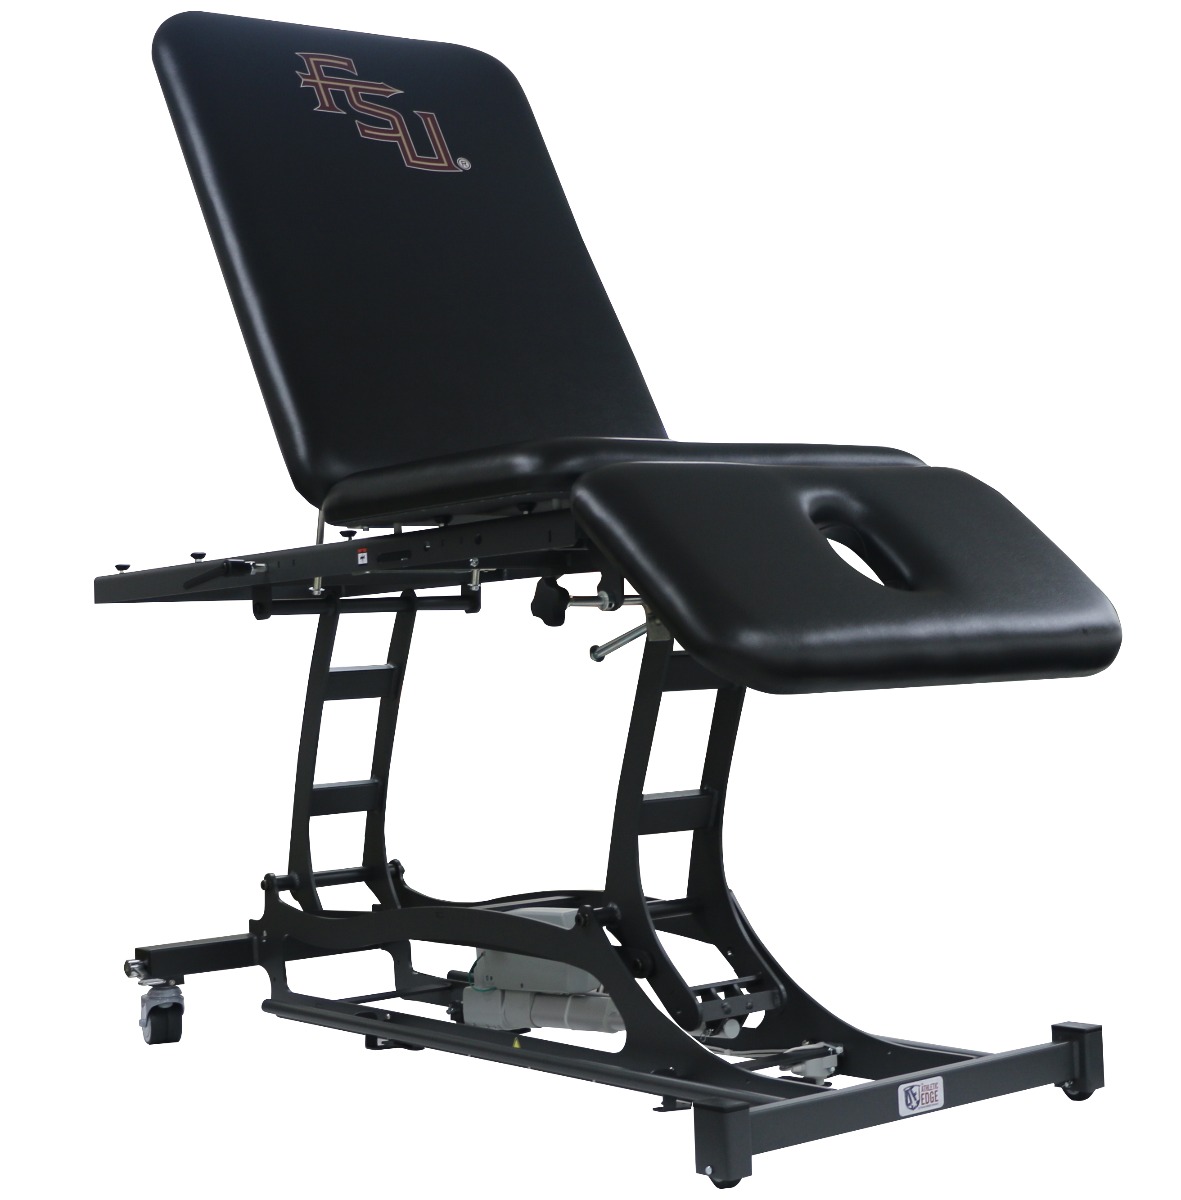 Athletic Edge THERA-P Electric Treatment Table